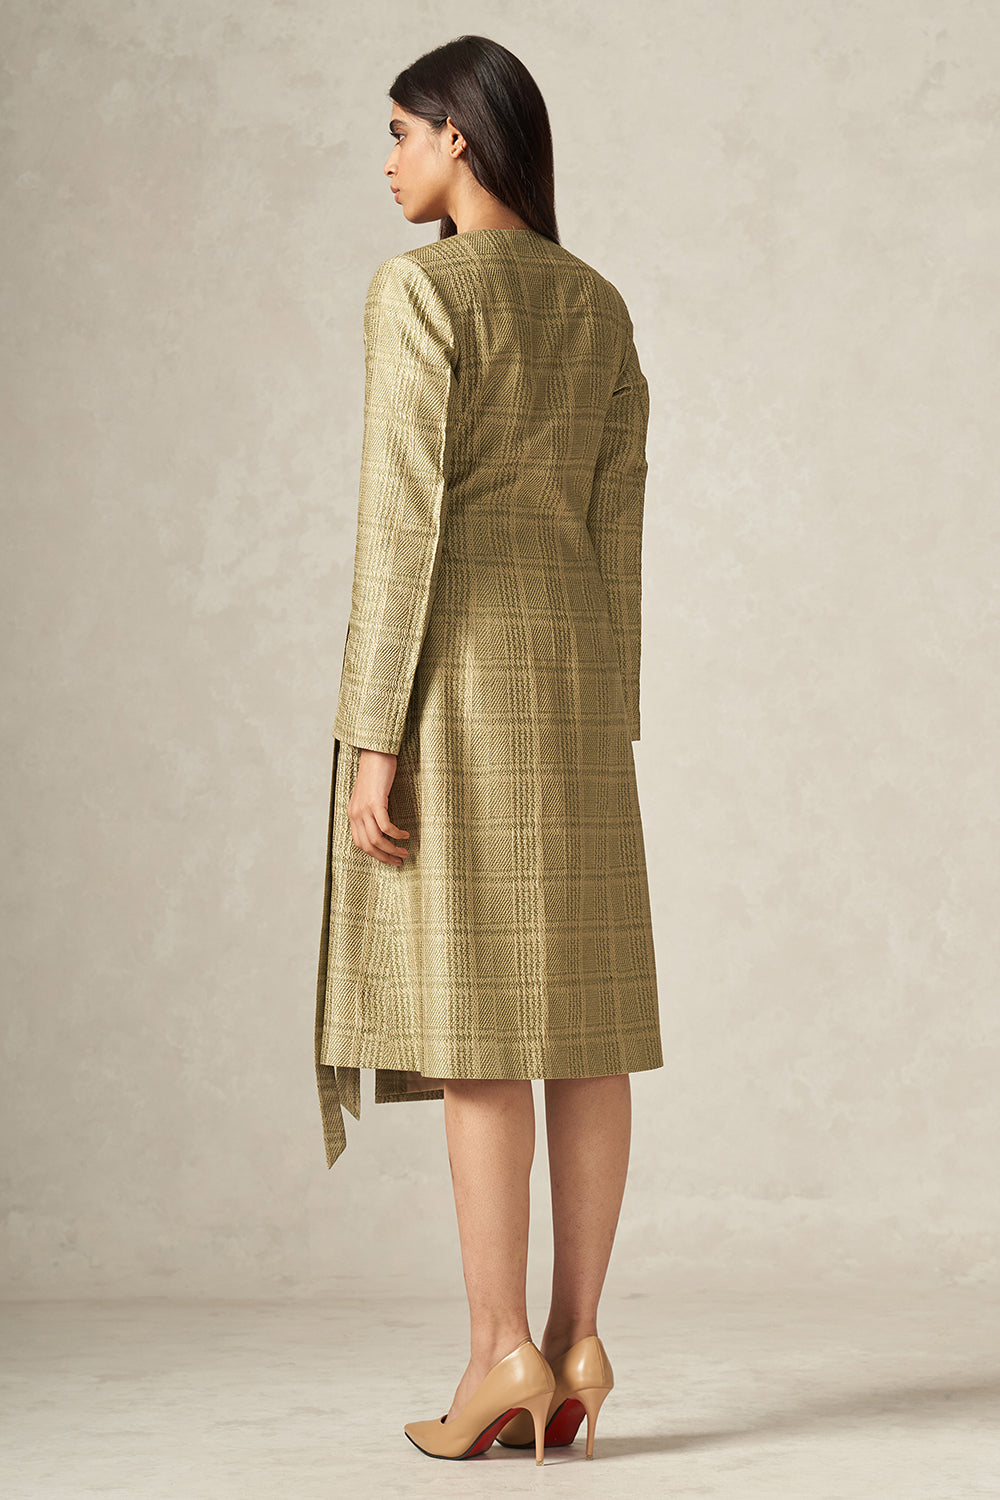 Green and Beige Handwoven Pure Silk Plaid Patterned Wrap Dress with Side Tie-up